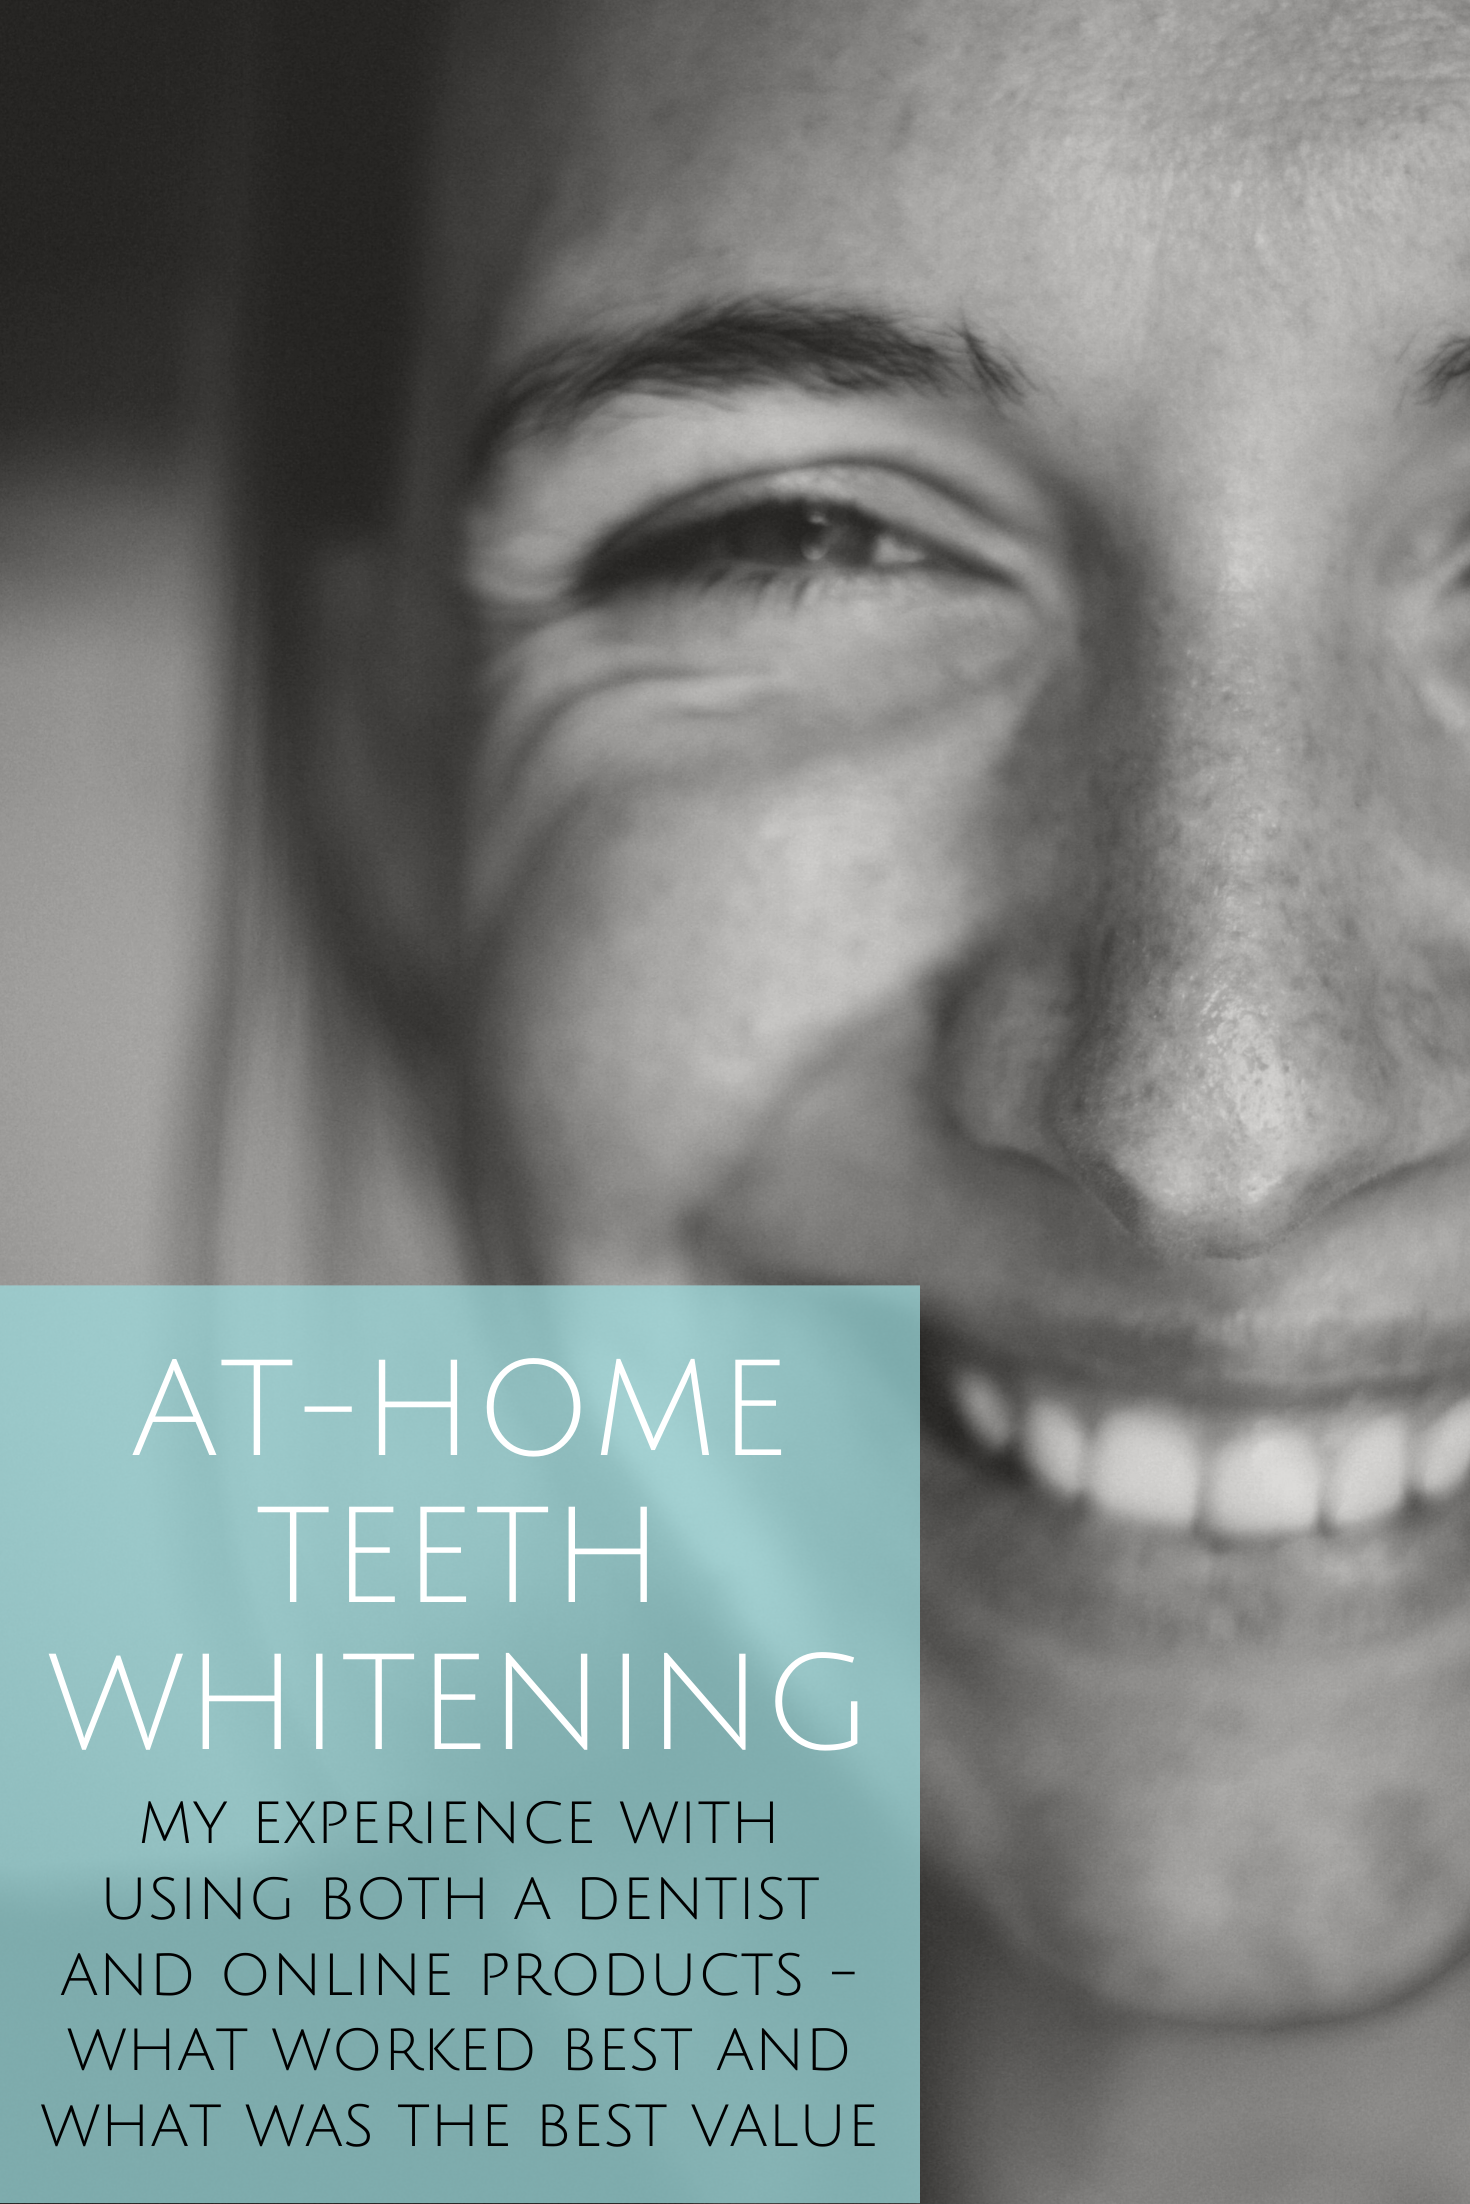 My At-Home Teeth Whitening Experience